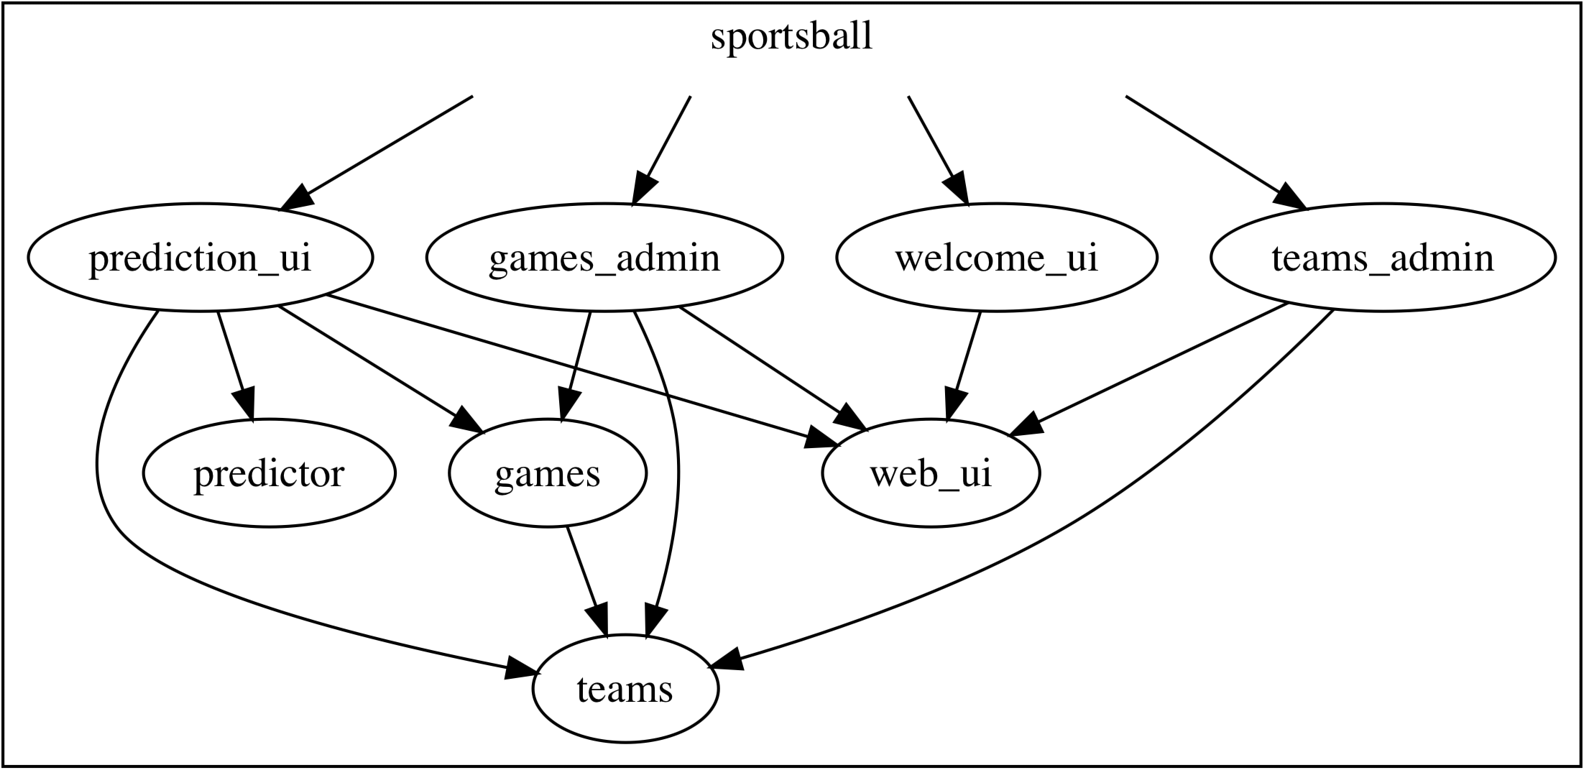 Sportsball Component Structure